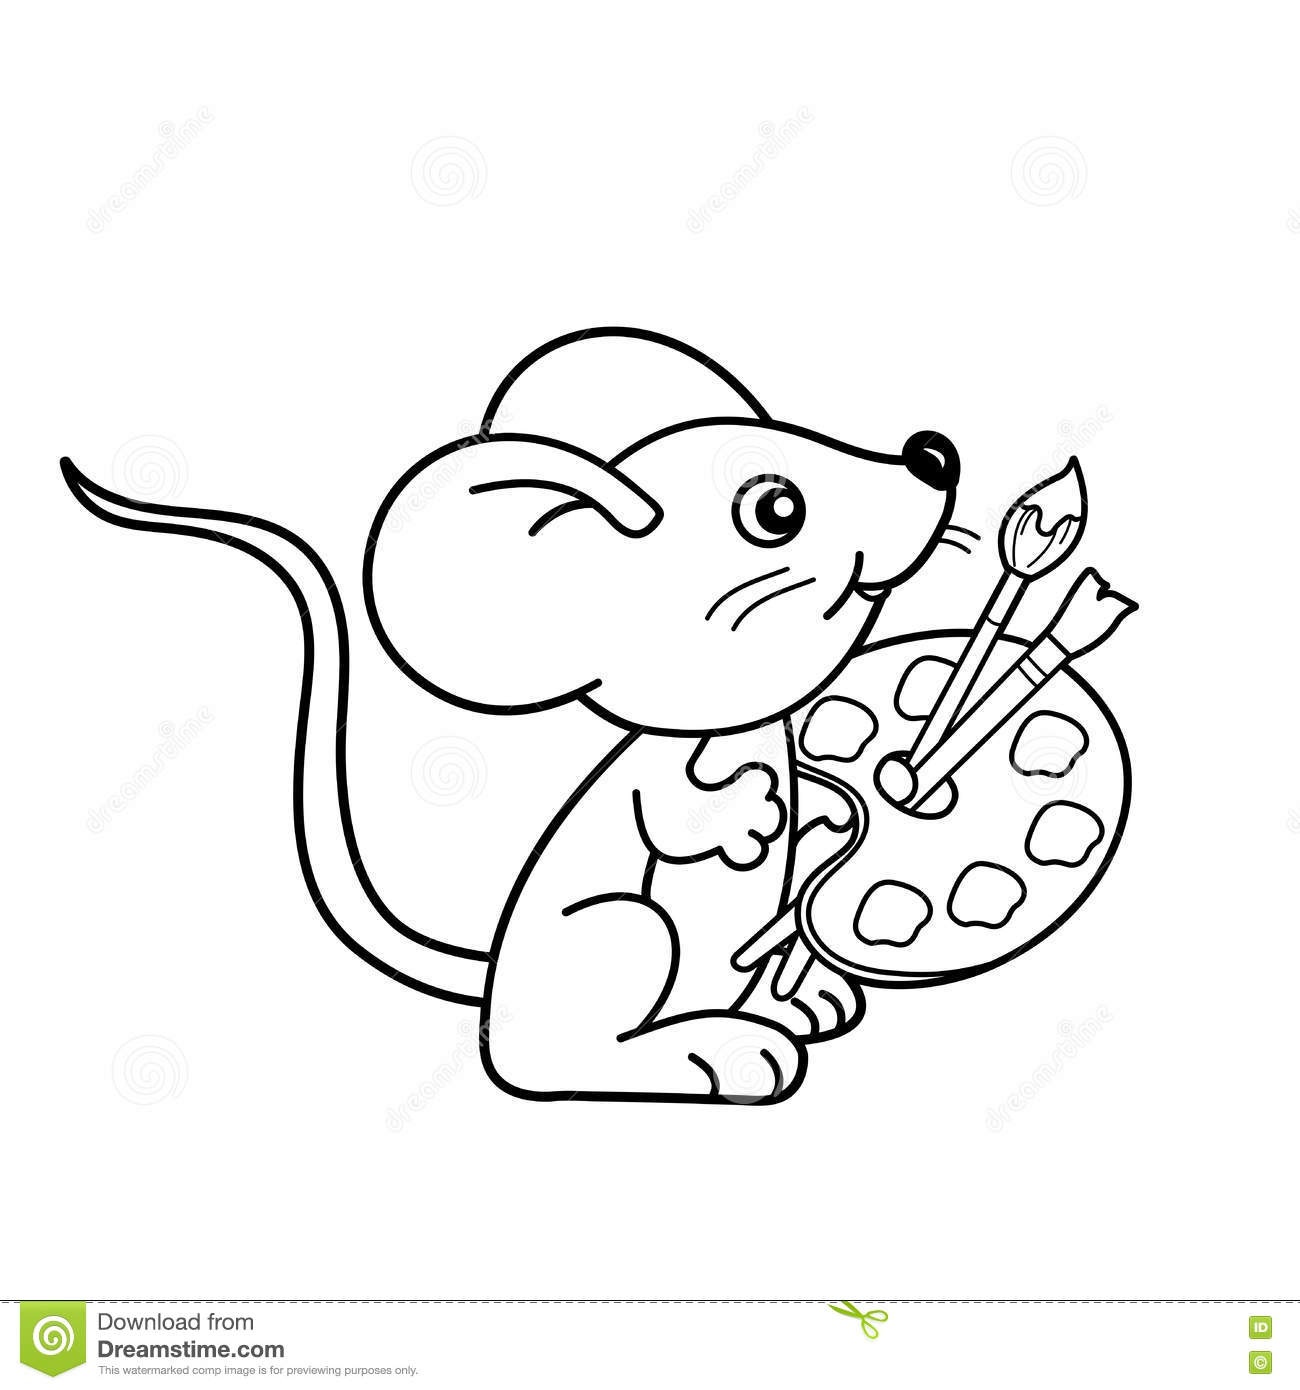 Paint Brushes Coloring Pages at GetColorings.com | Free ...